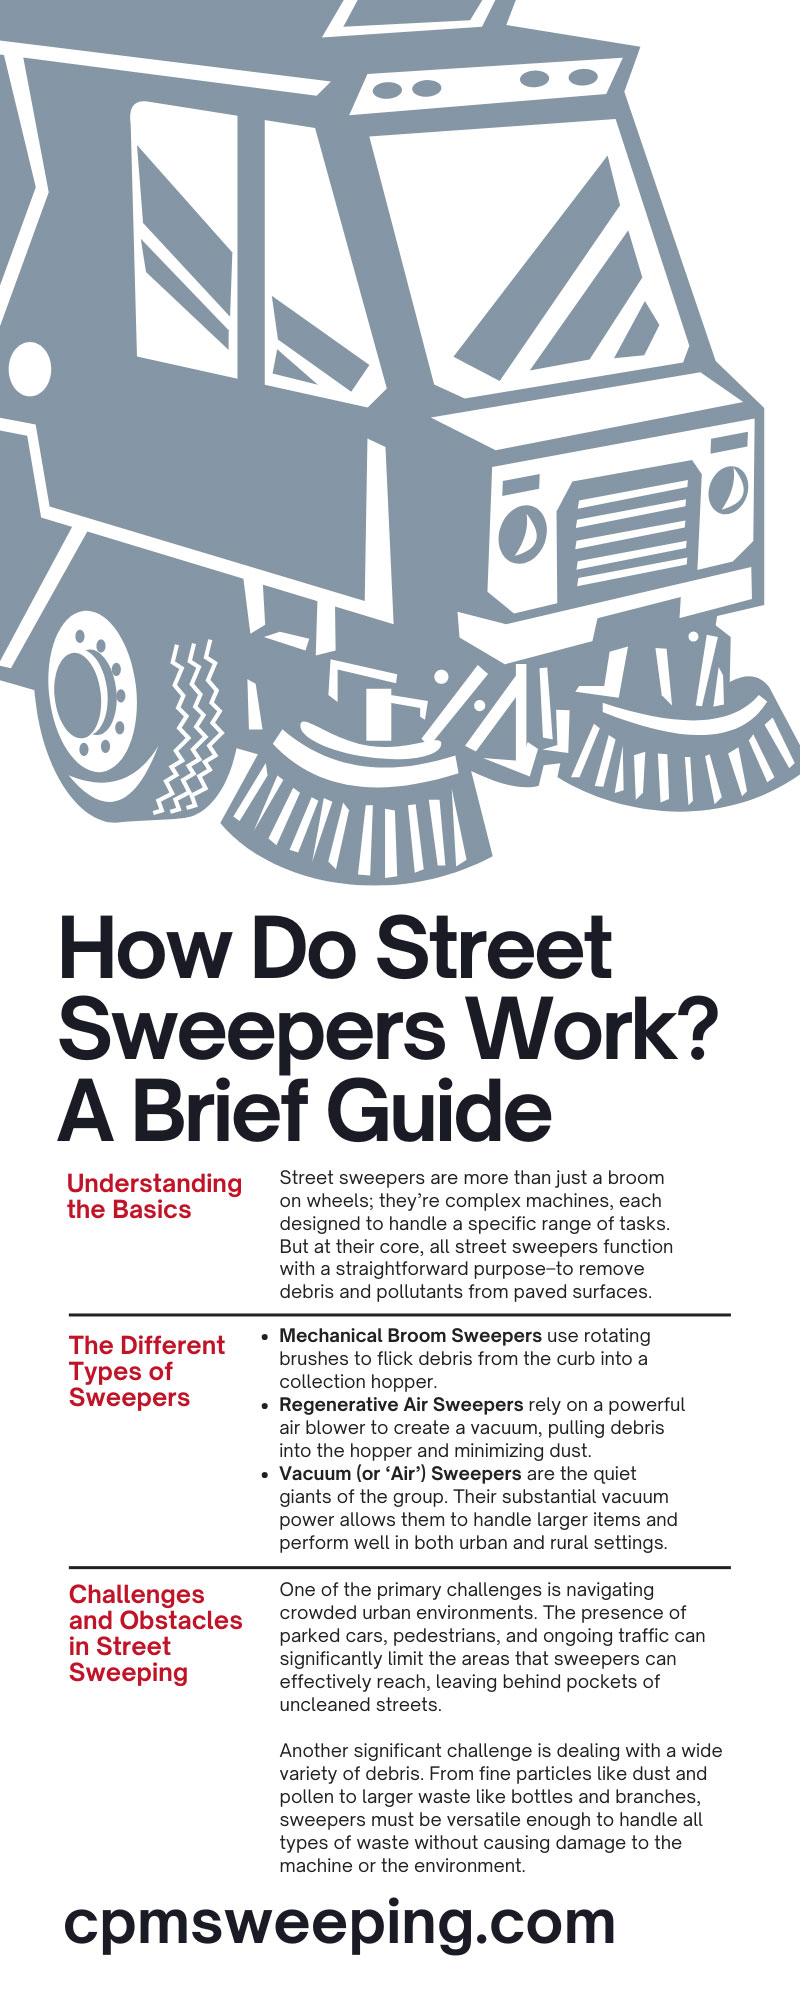 How Do Street Sweepers Work? A Brief Guide